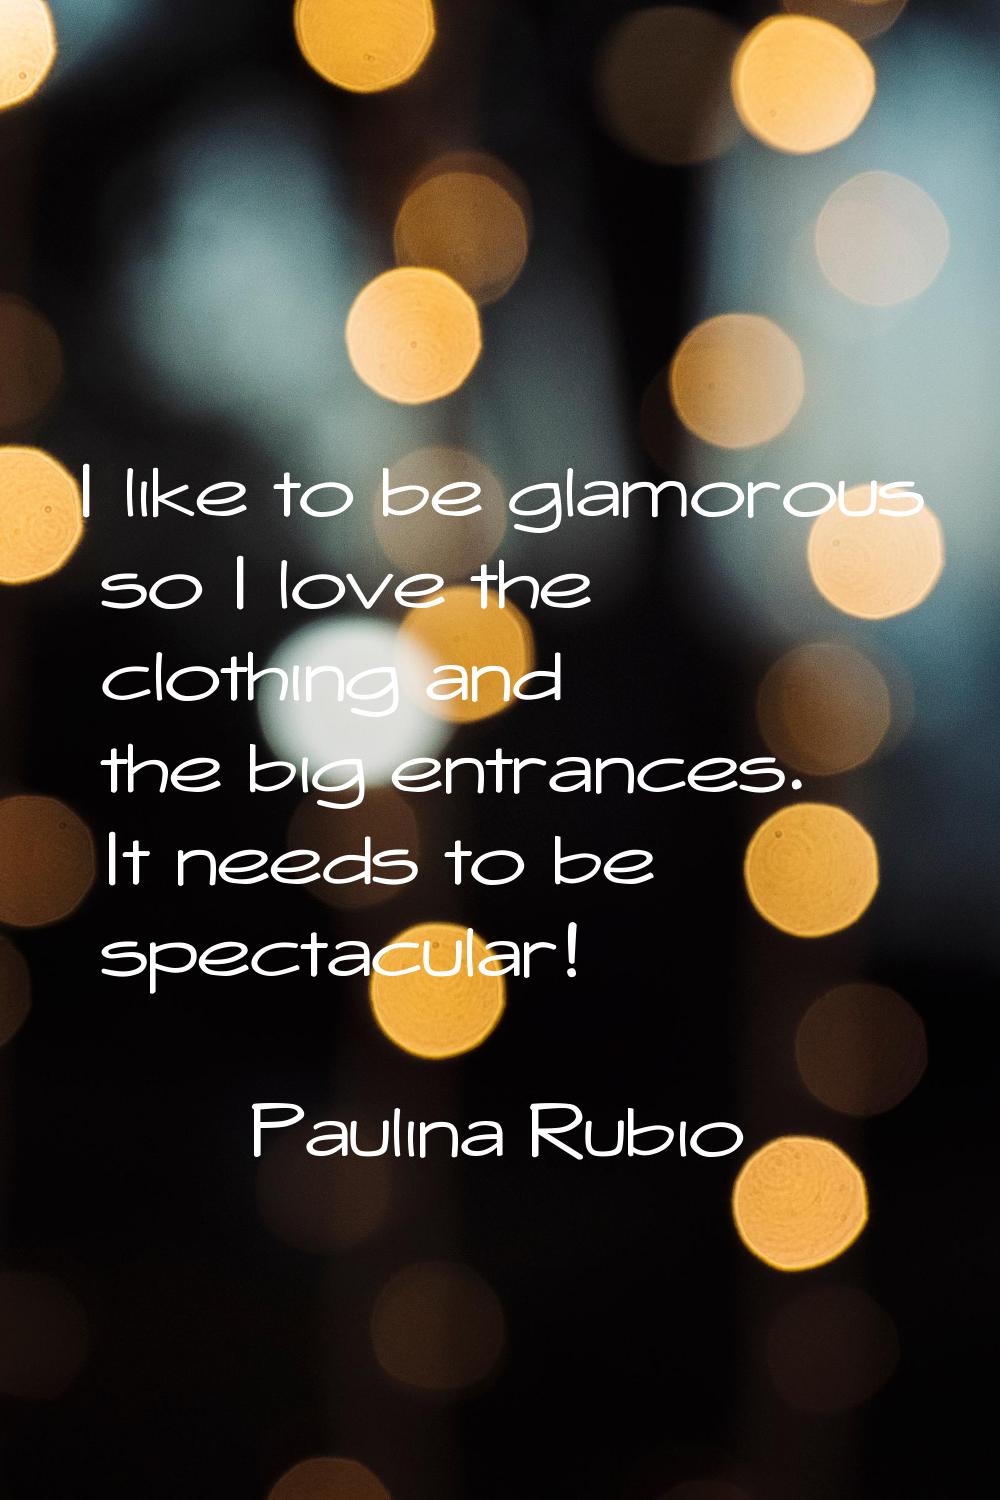 I like to be glamorous so I love the clothing and the big entrances. It needs to be spectacular!